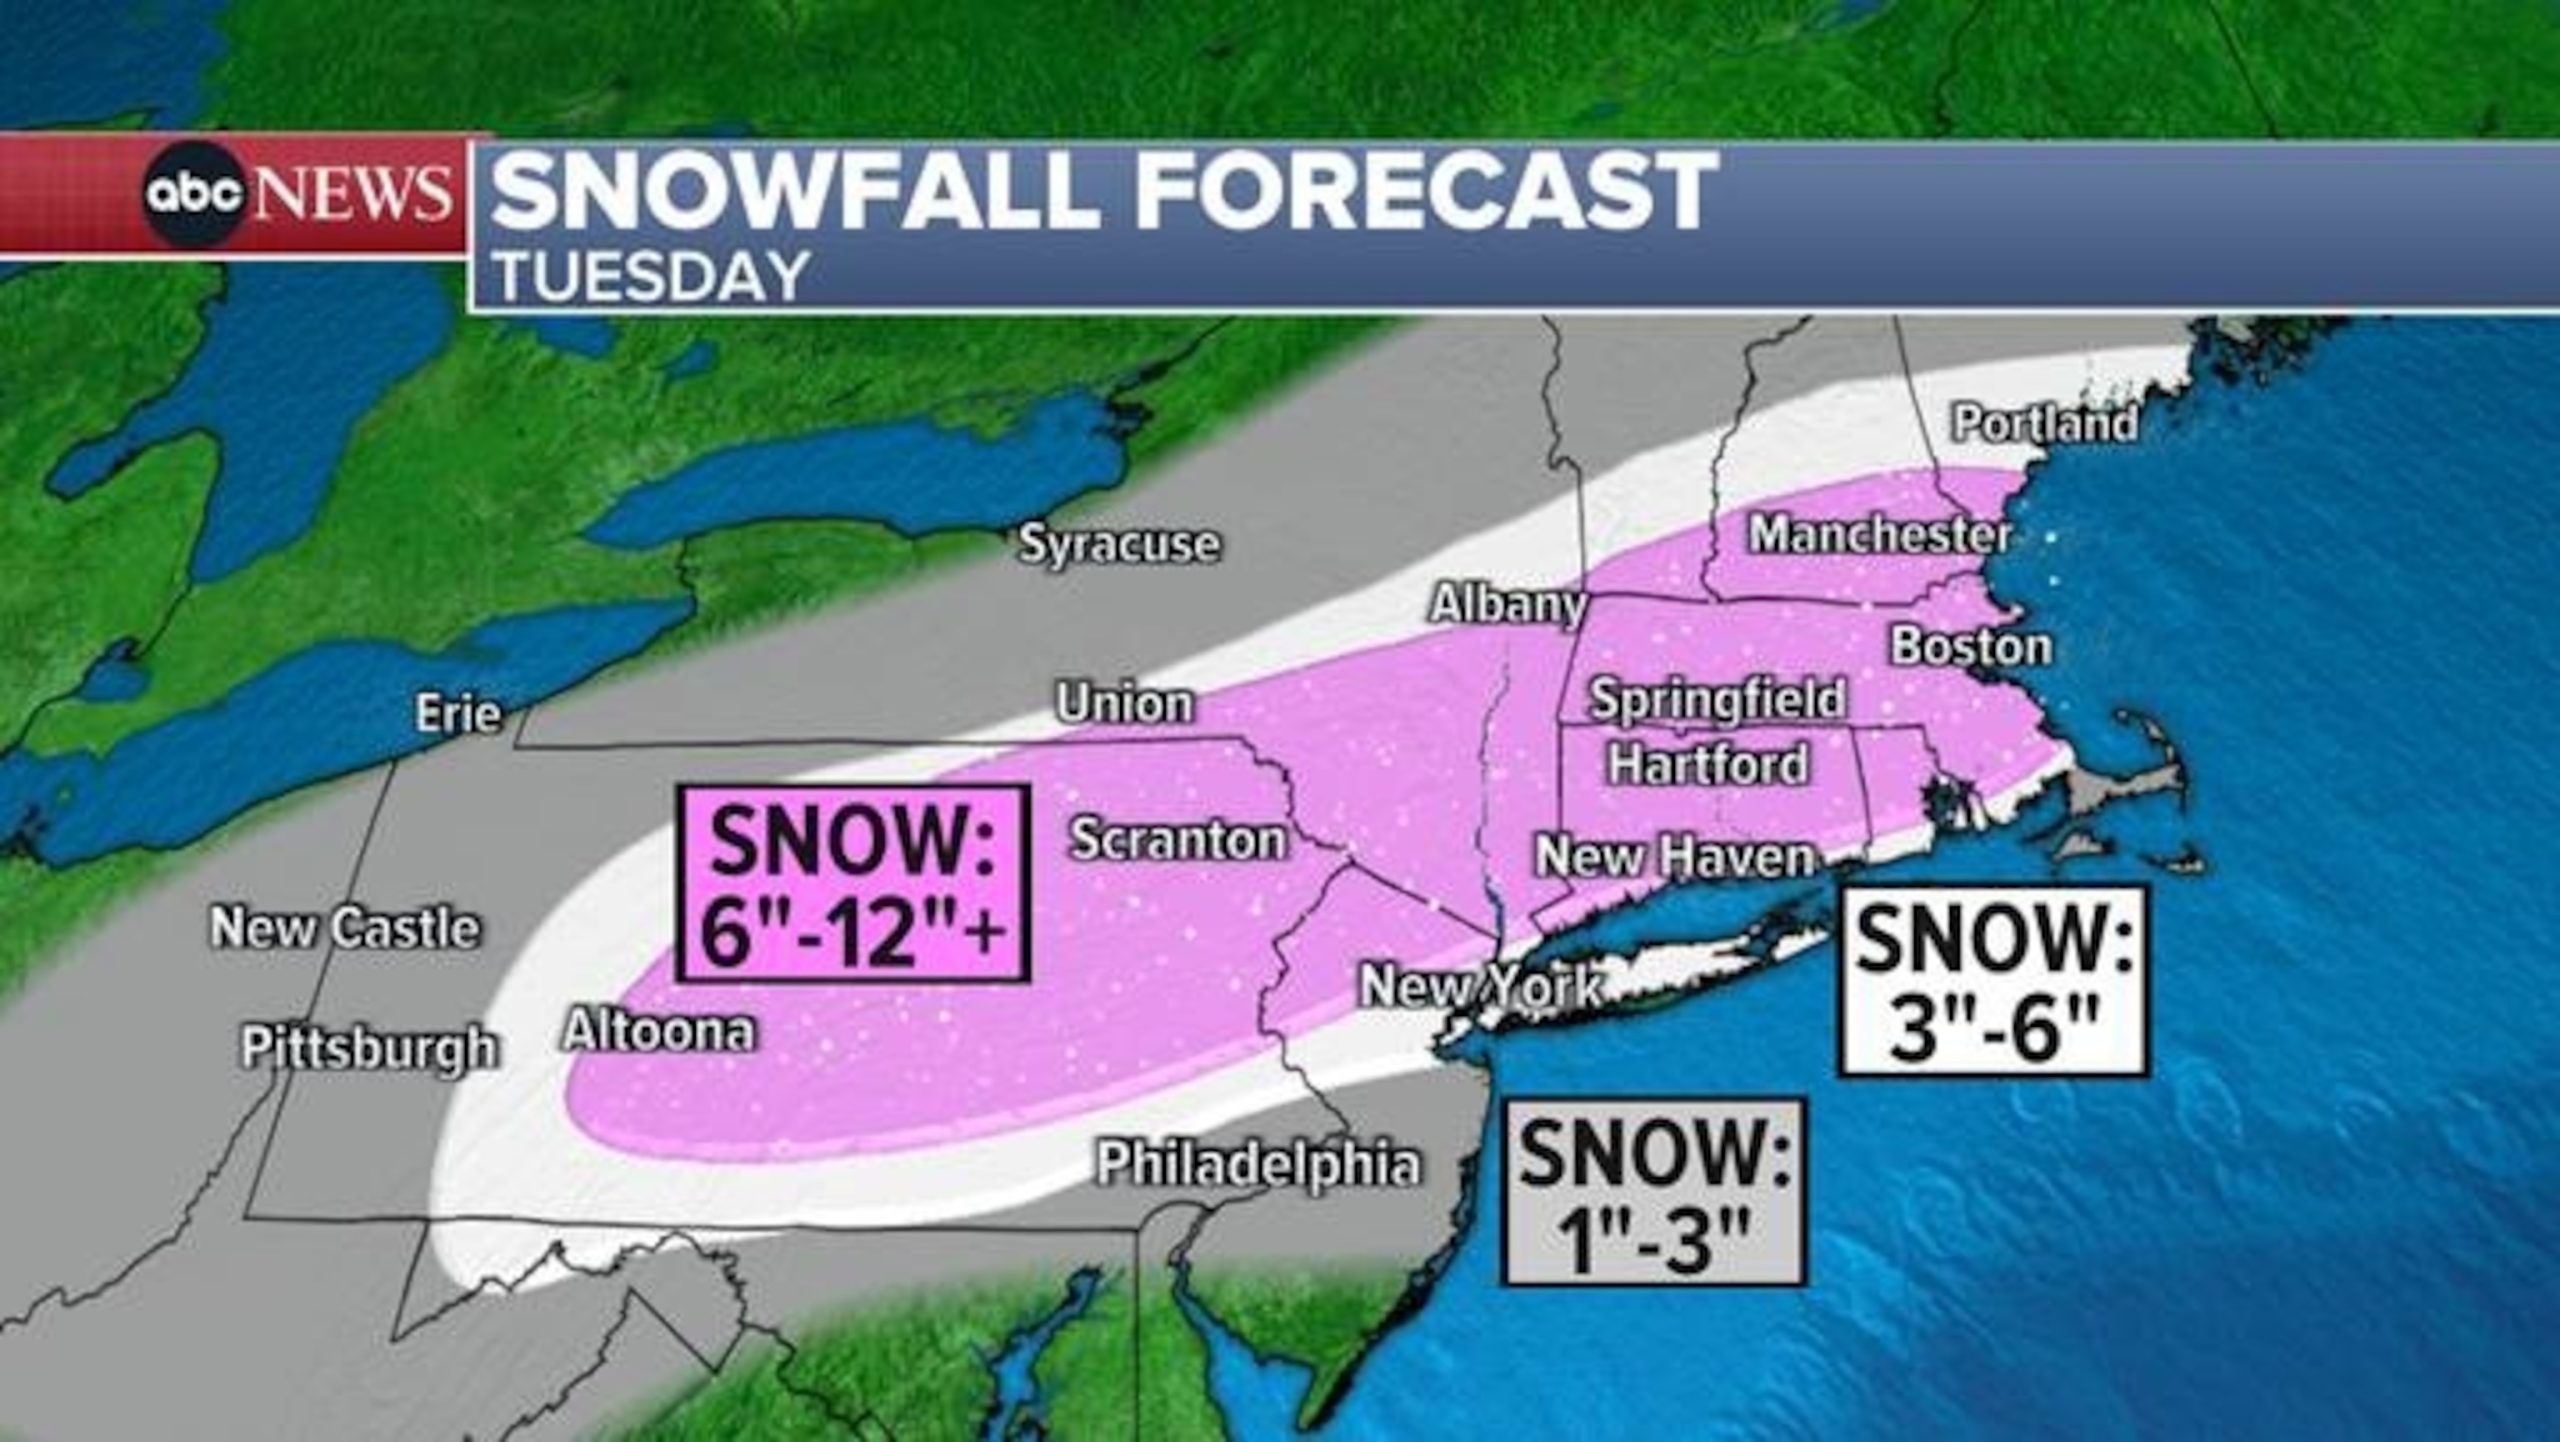 What to Expect: Winter Storm Predicted to Bring Up to 1 Foot of Snow to Parts of Northeast on Tuesday